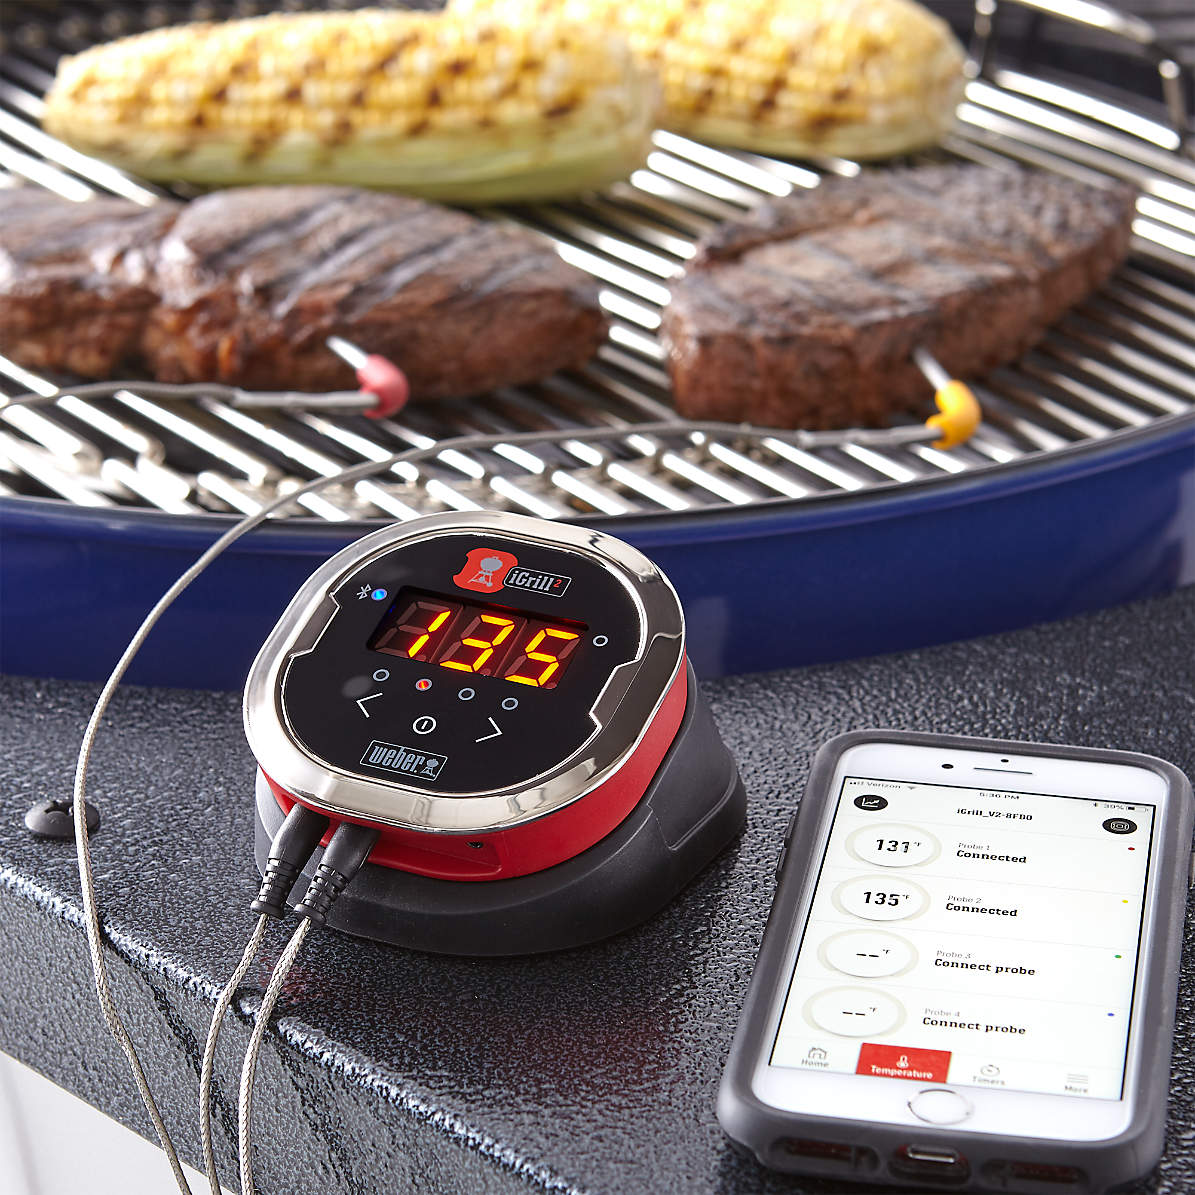 Igrill thermometer app